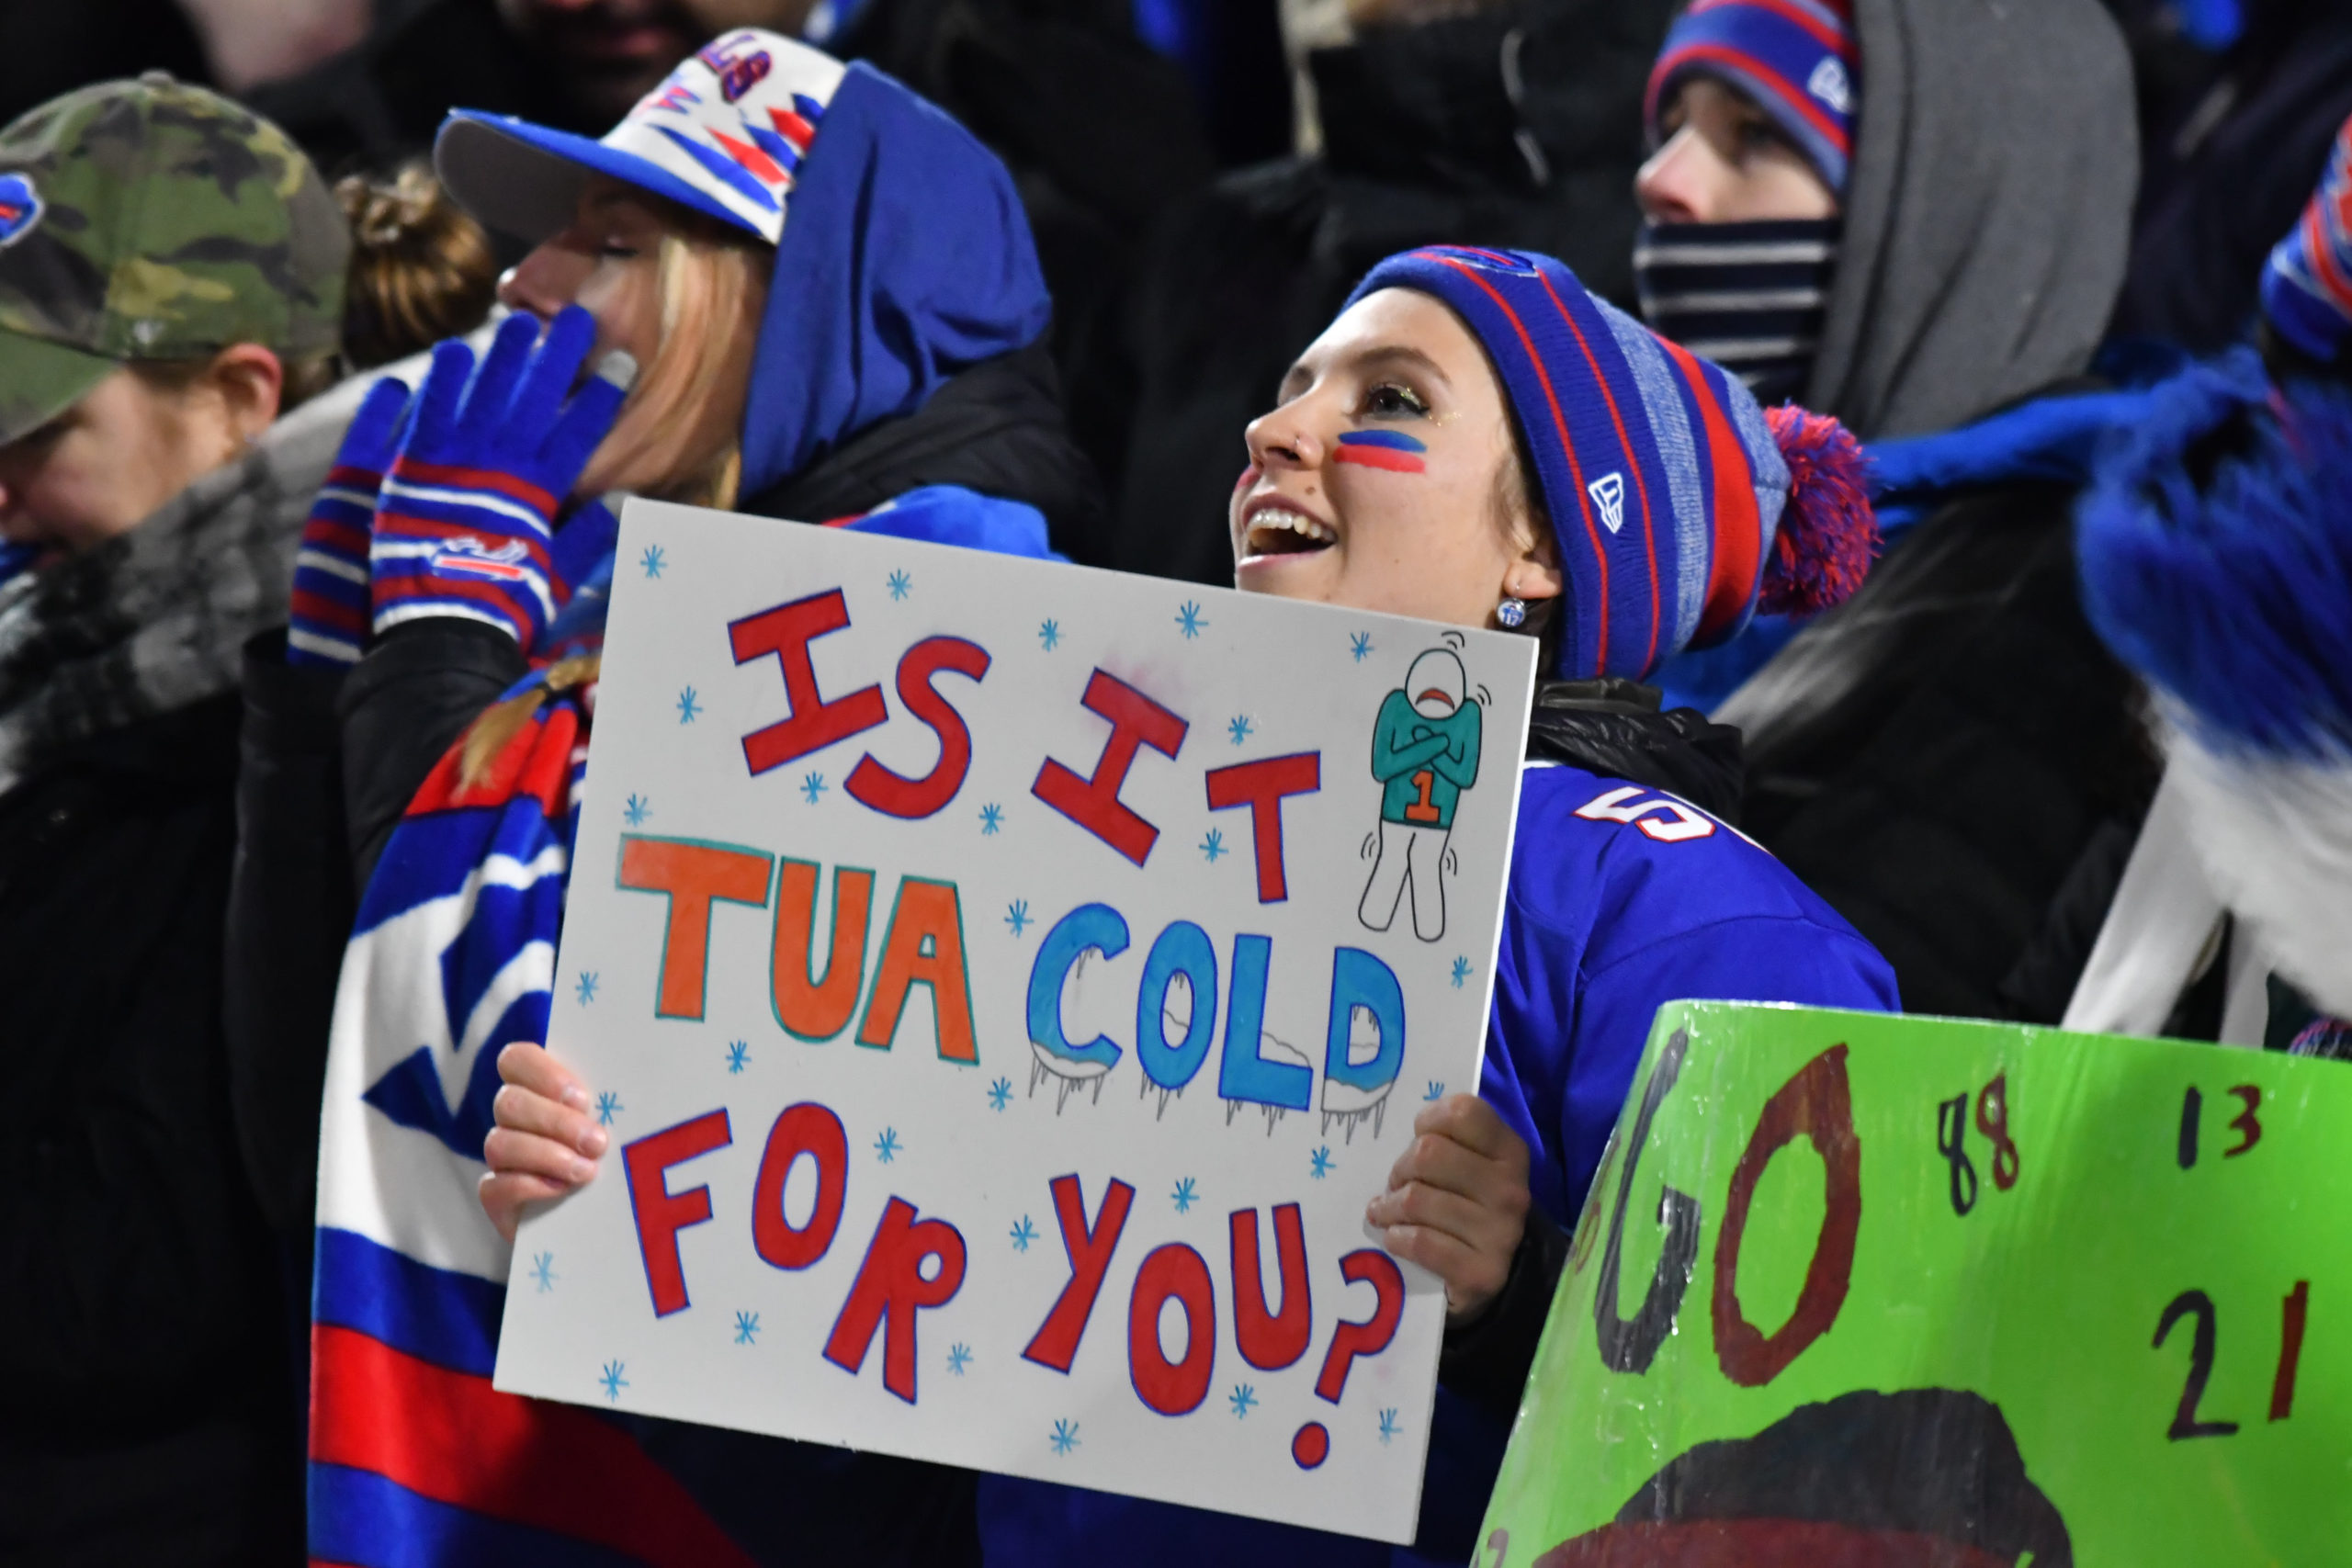 Bills Fans Created a Unique Playoff Atmosphere vs. Dolphins